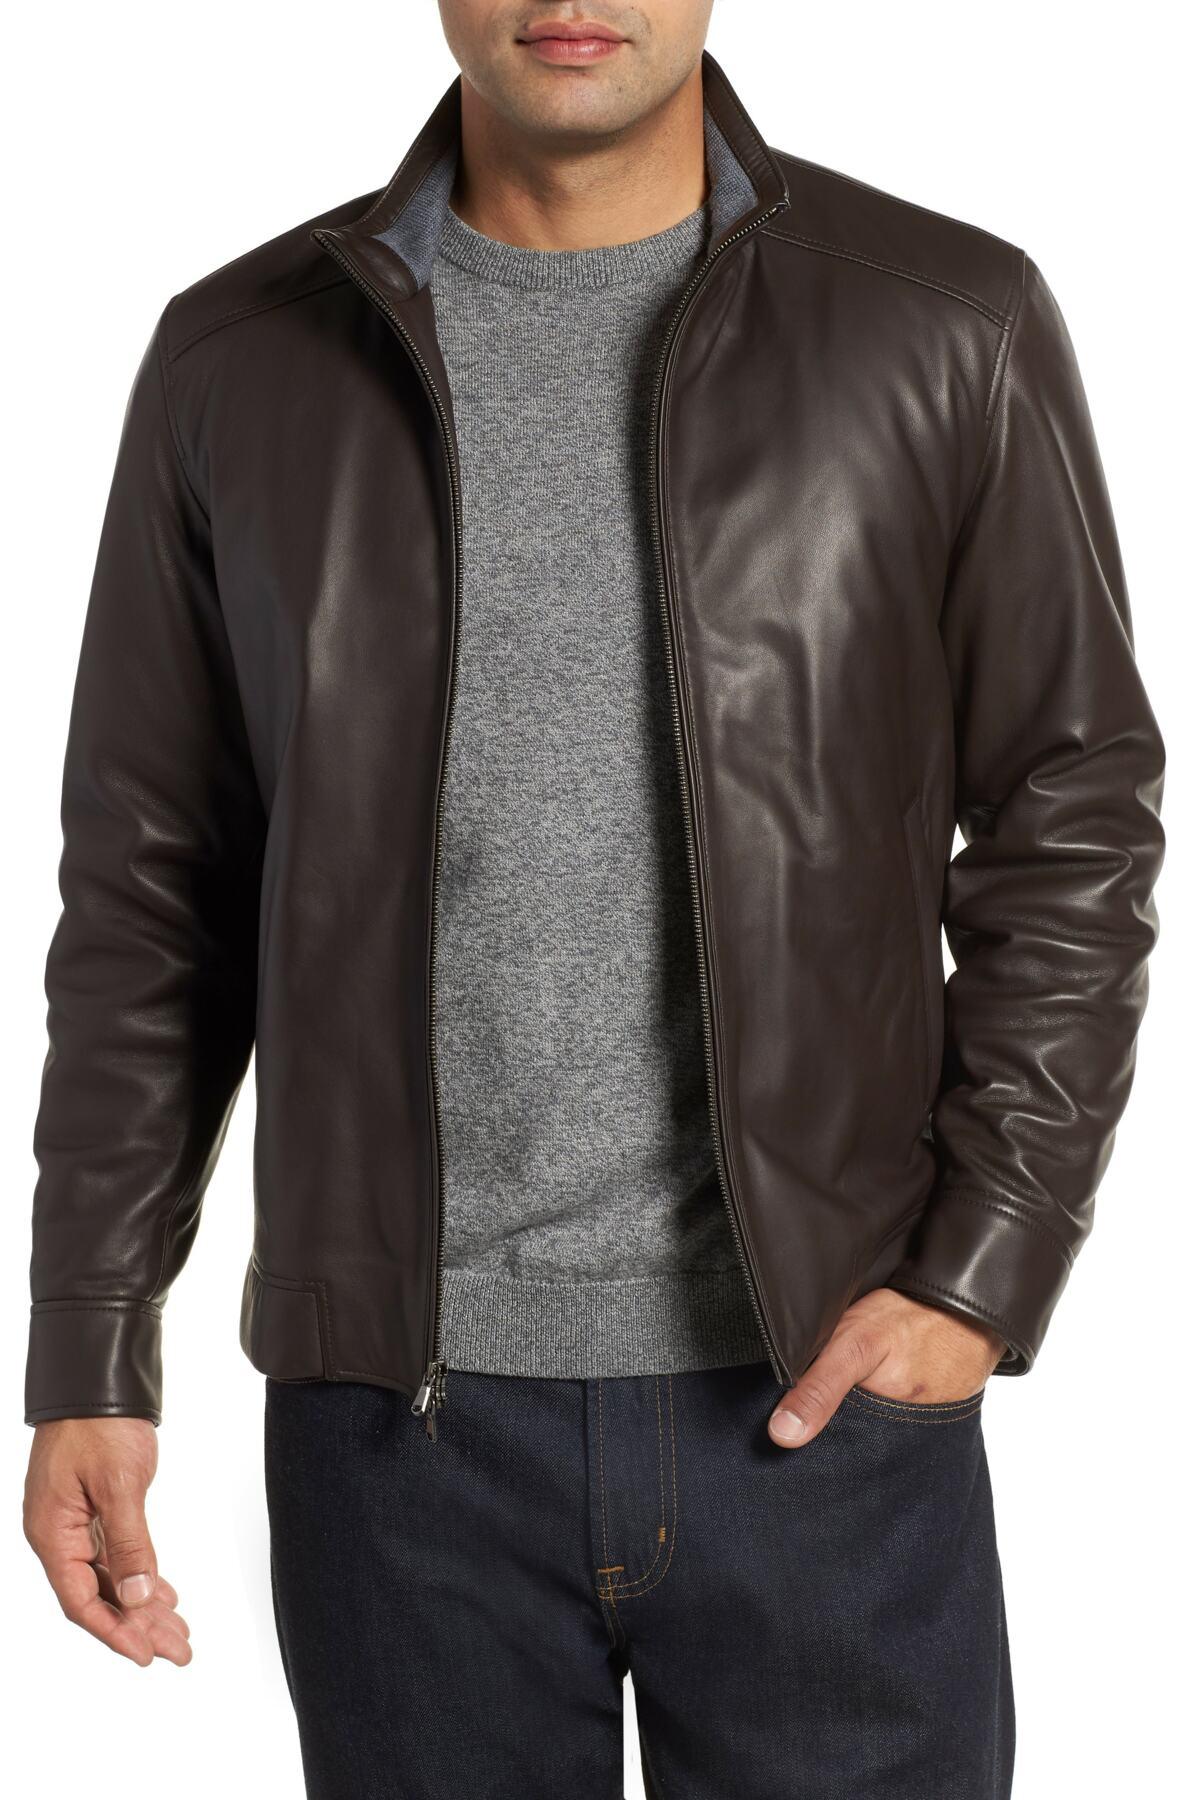 Peter Millar Leather Bomber Jacket in Brown for Men - Lyst